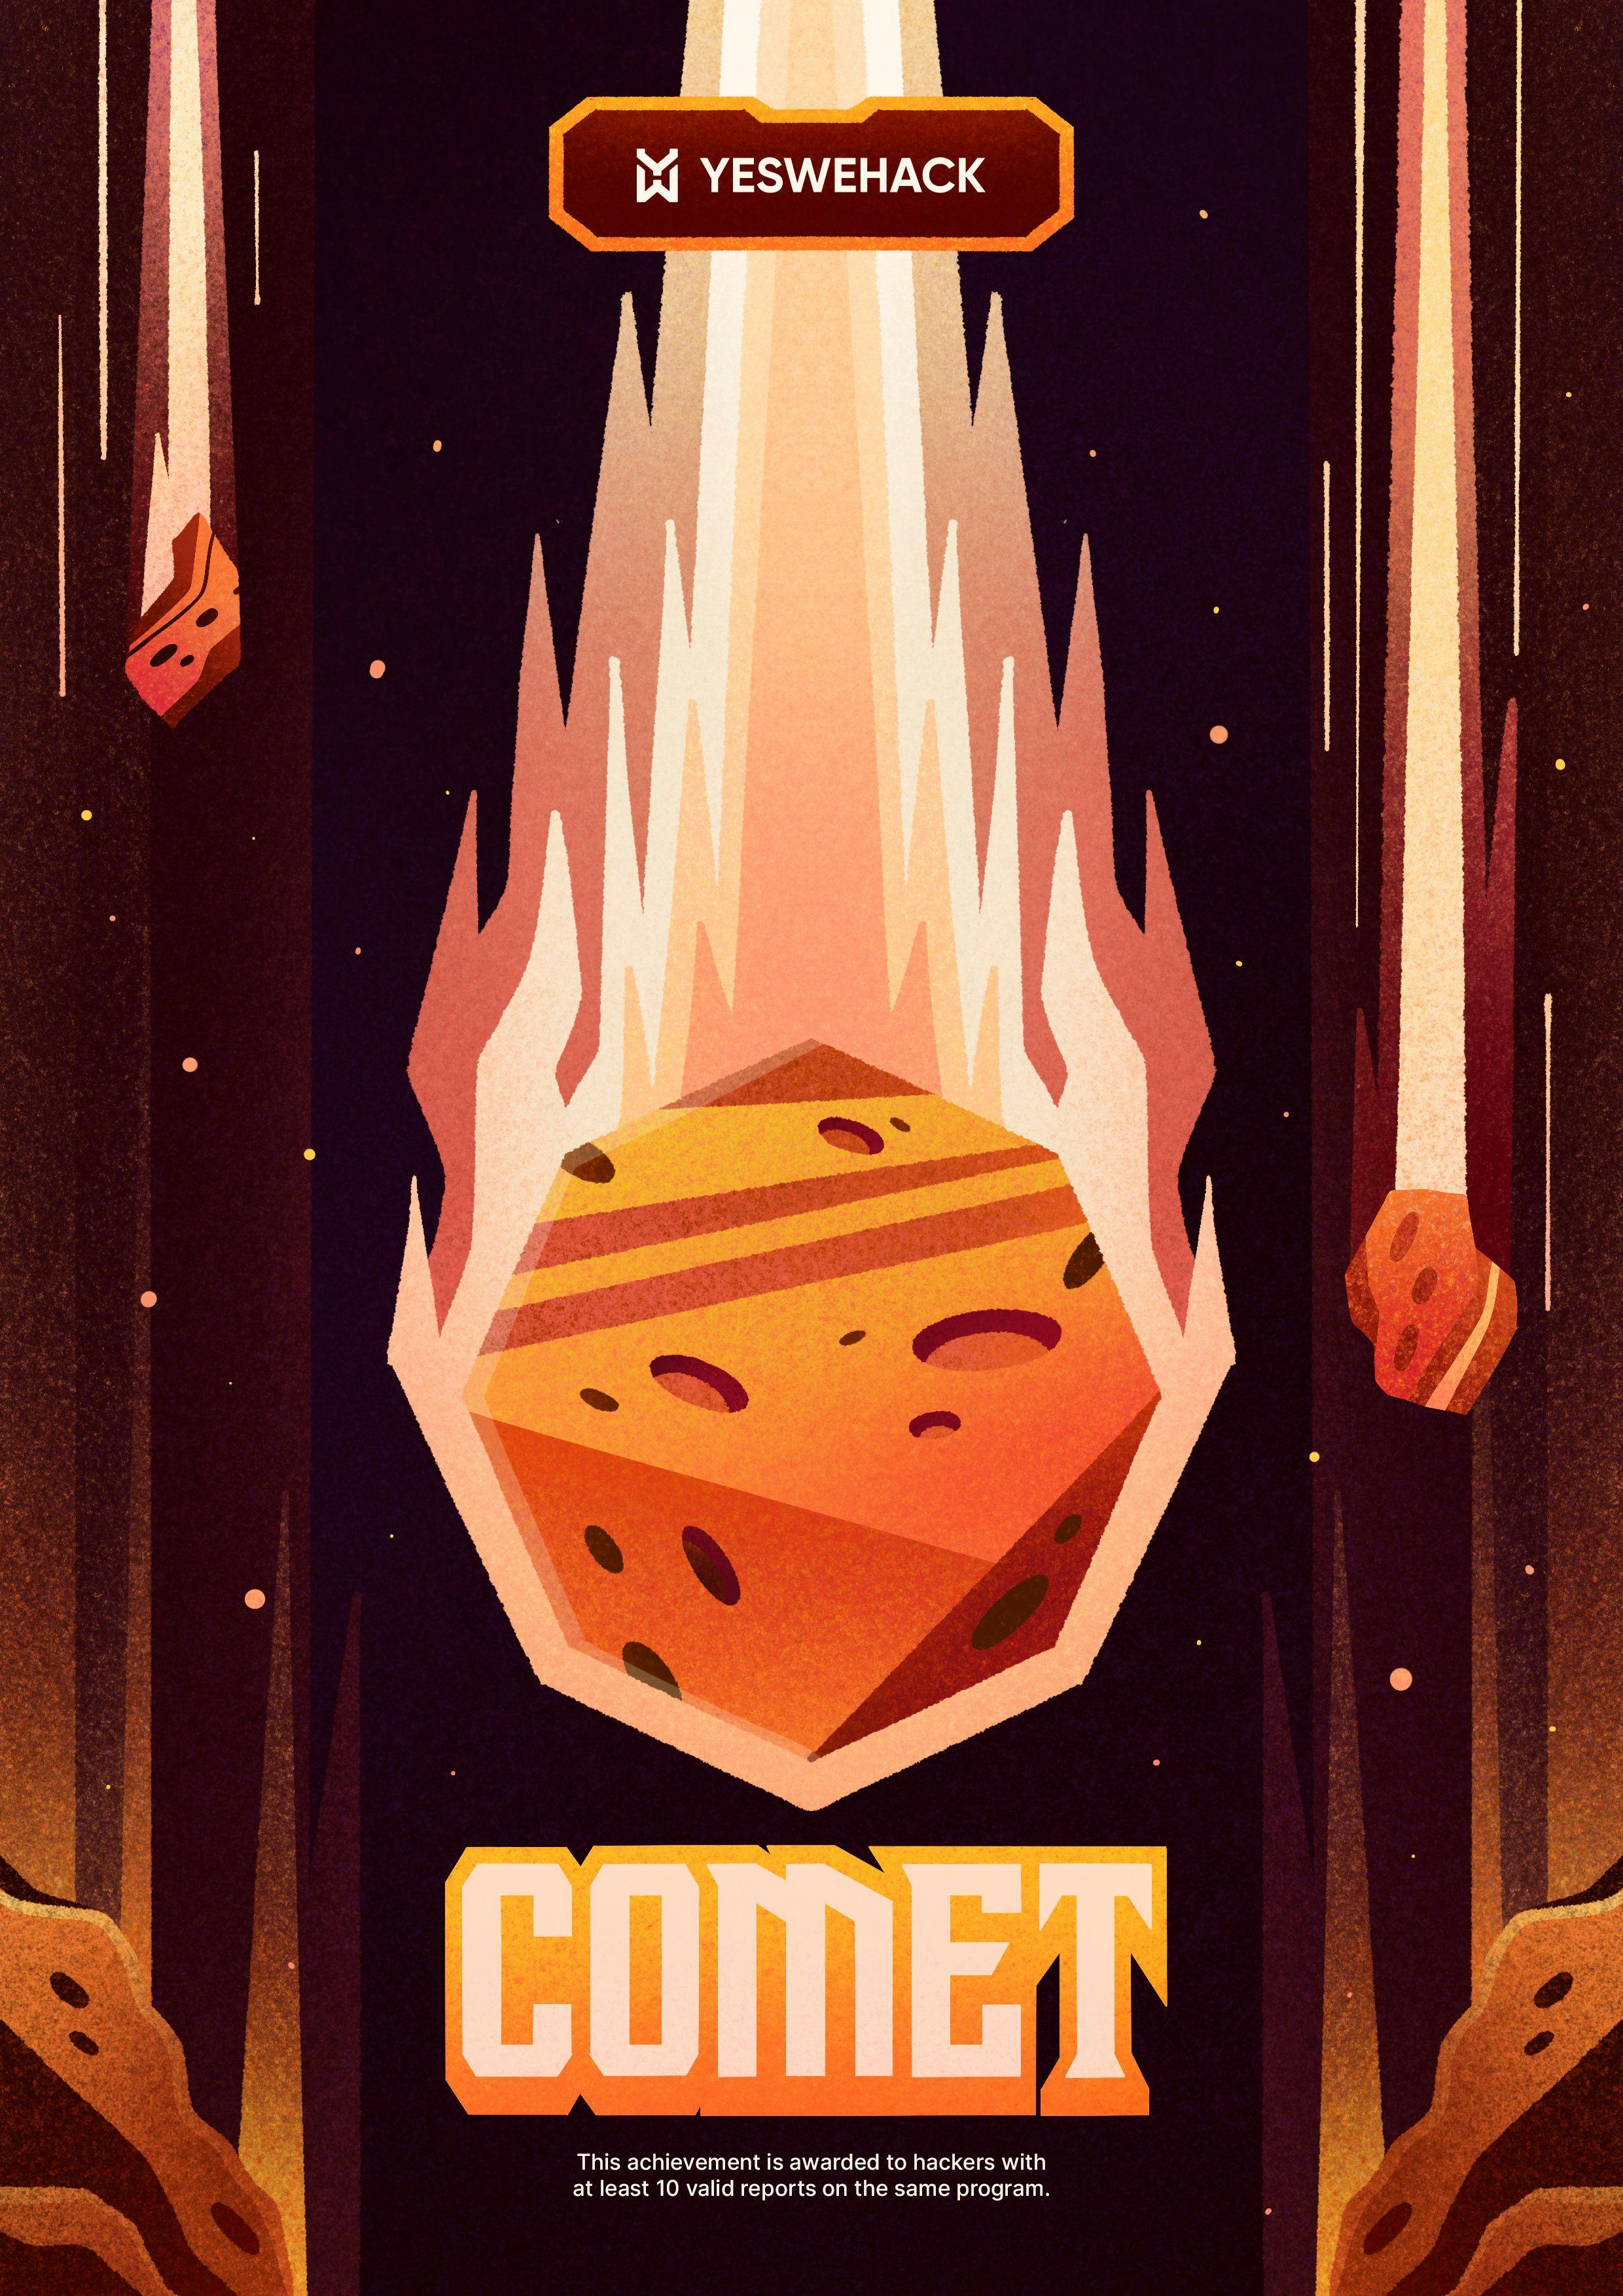 YesWeHack hunter achievements: COMET poster for ethical hackers who submit at least 10 valid reports on the same program